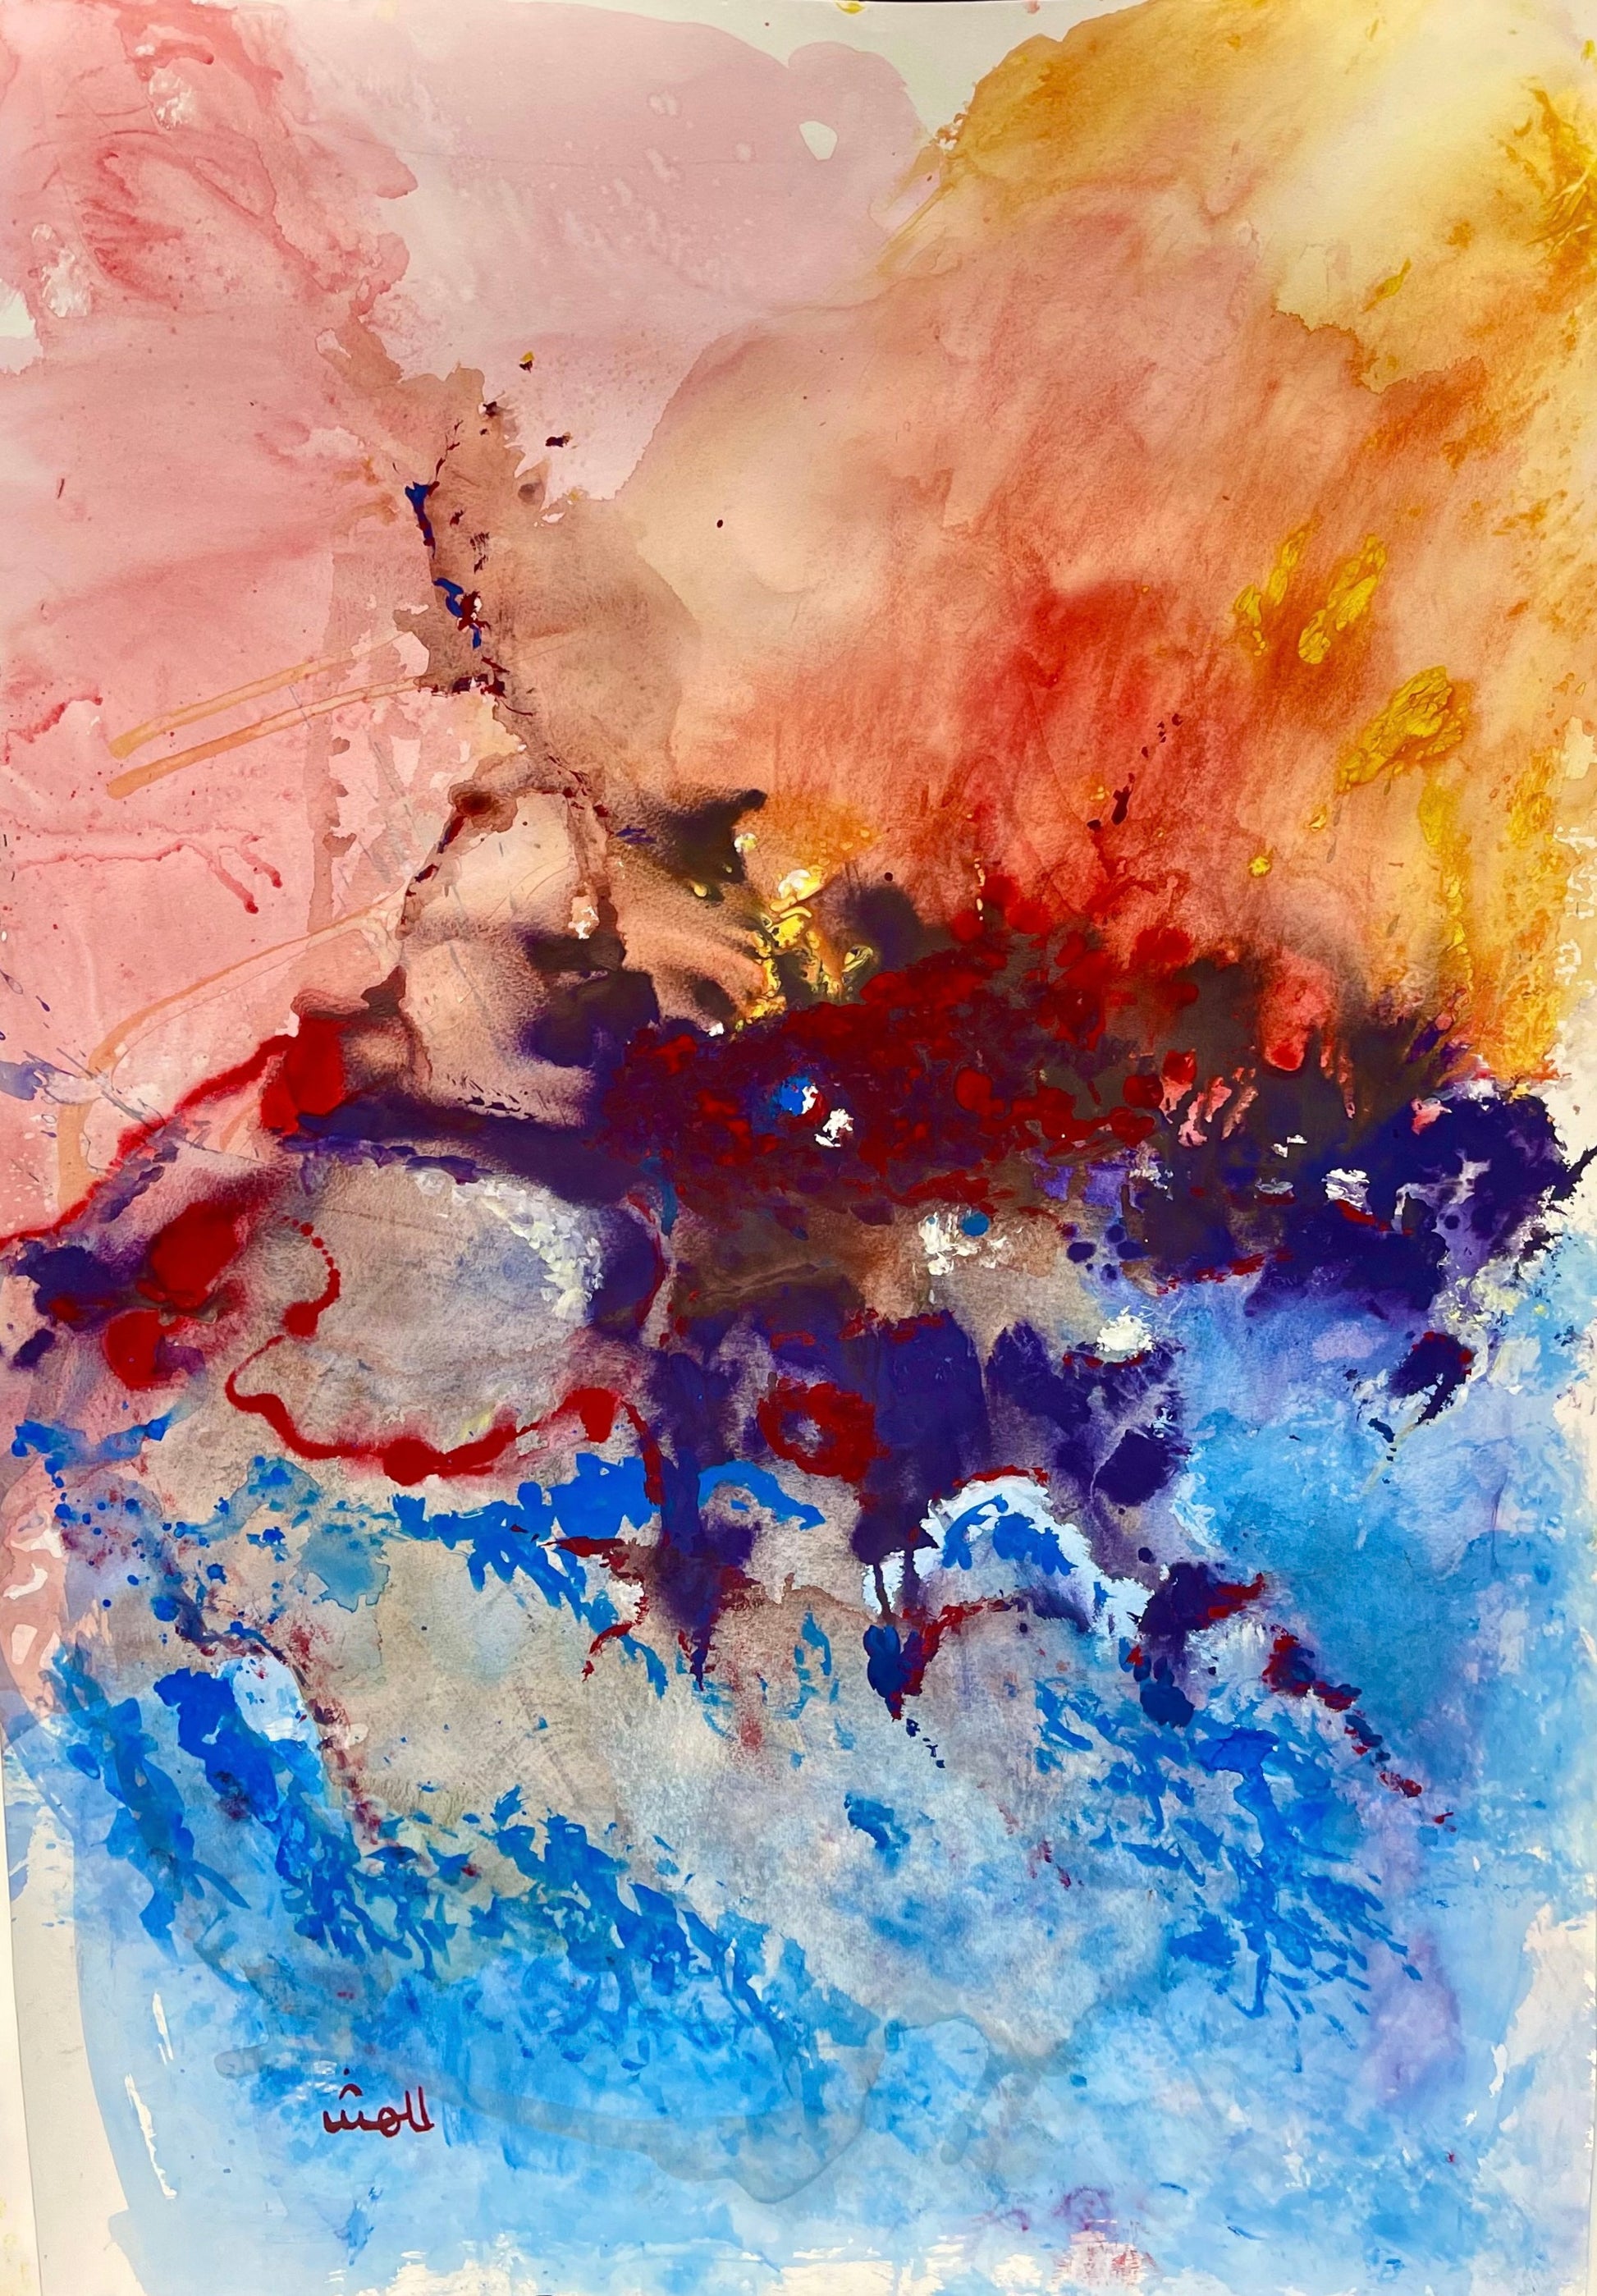 Moment Of Clarity-Sonarta.com, It is that moment, when everything is as clear as a bell and the road ahead is as smooth clear and blue water. Moment Of Clarity is an Acrylic on Paper Painting by Shahla Rahimi Reynolds. It is 48" H x 32" W.  